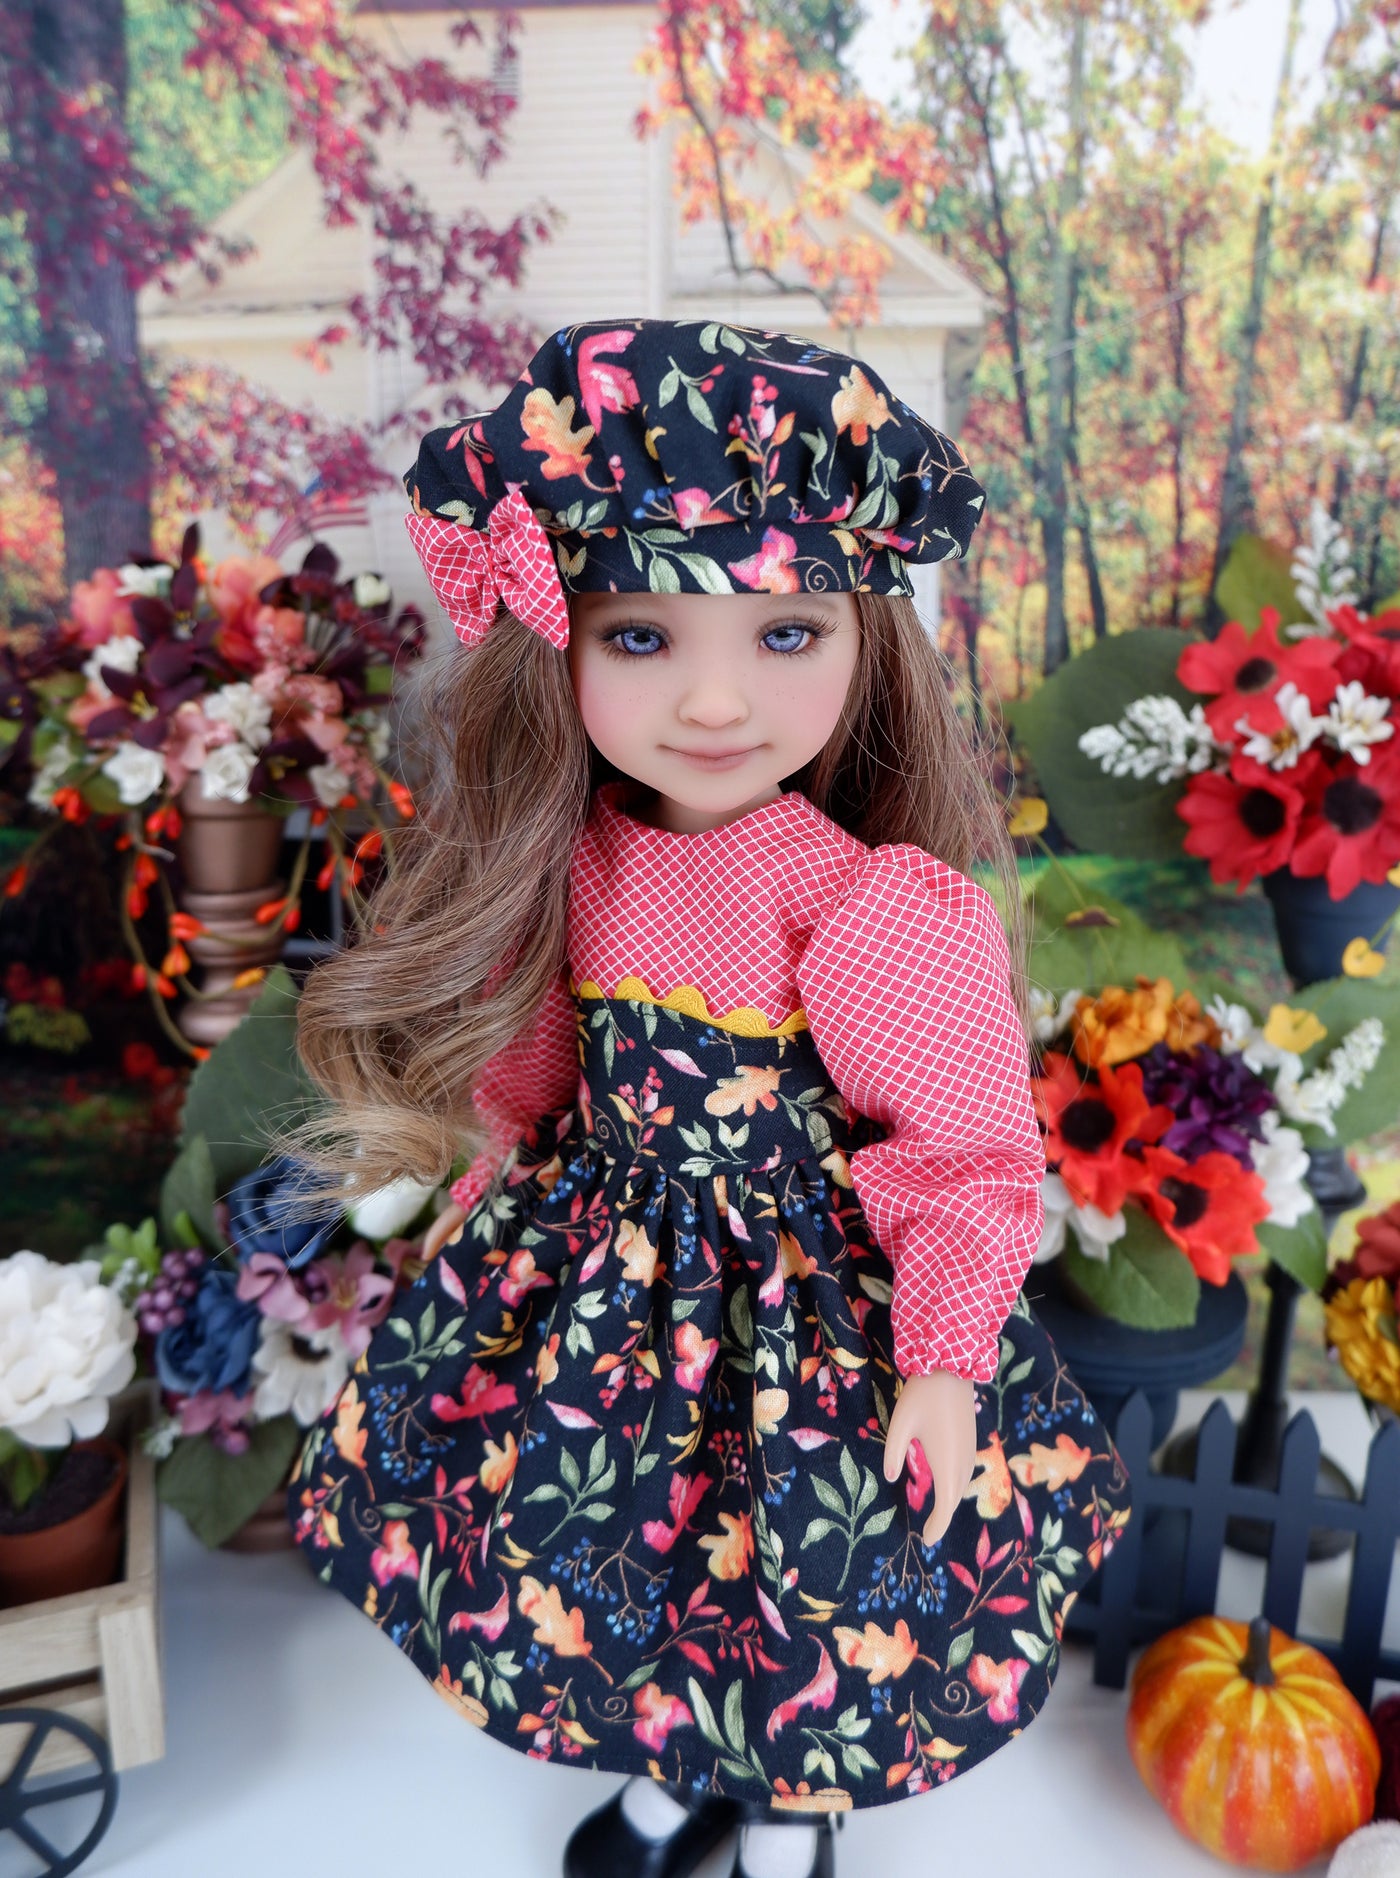 Autumn Beauty - dress with shoes for Ruby Red Fashion Friends doll